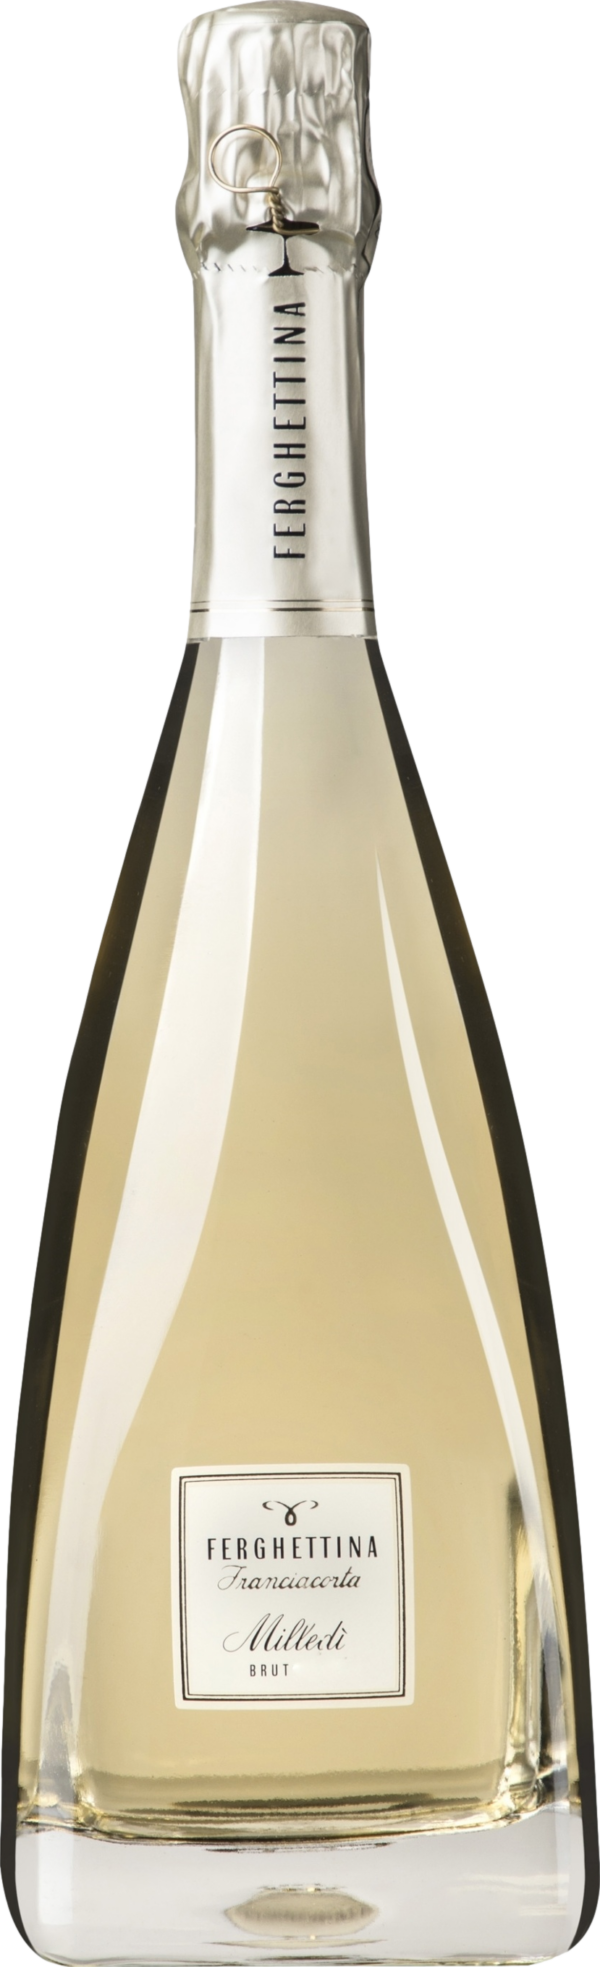 Product image of Ferghettina Franciacorta Milledi Brut from 8wines